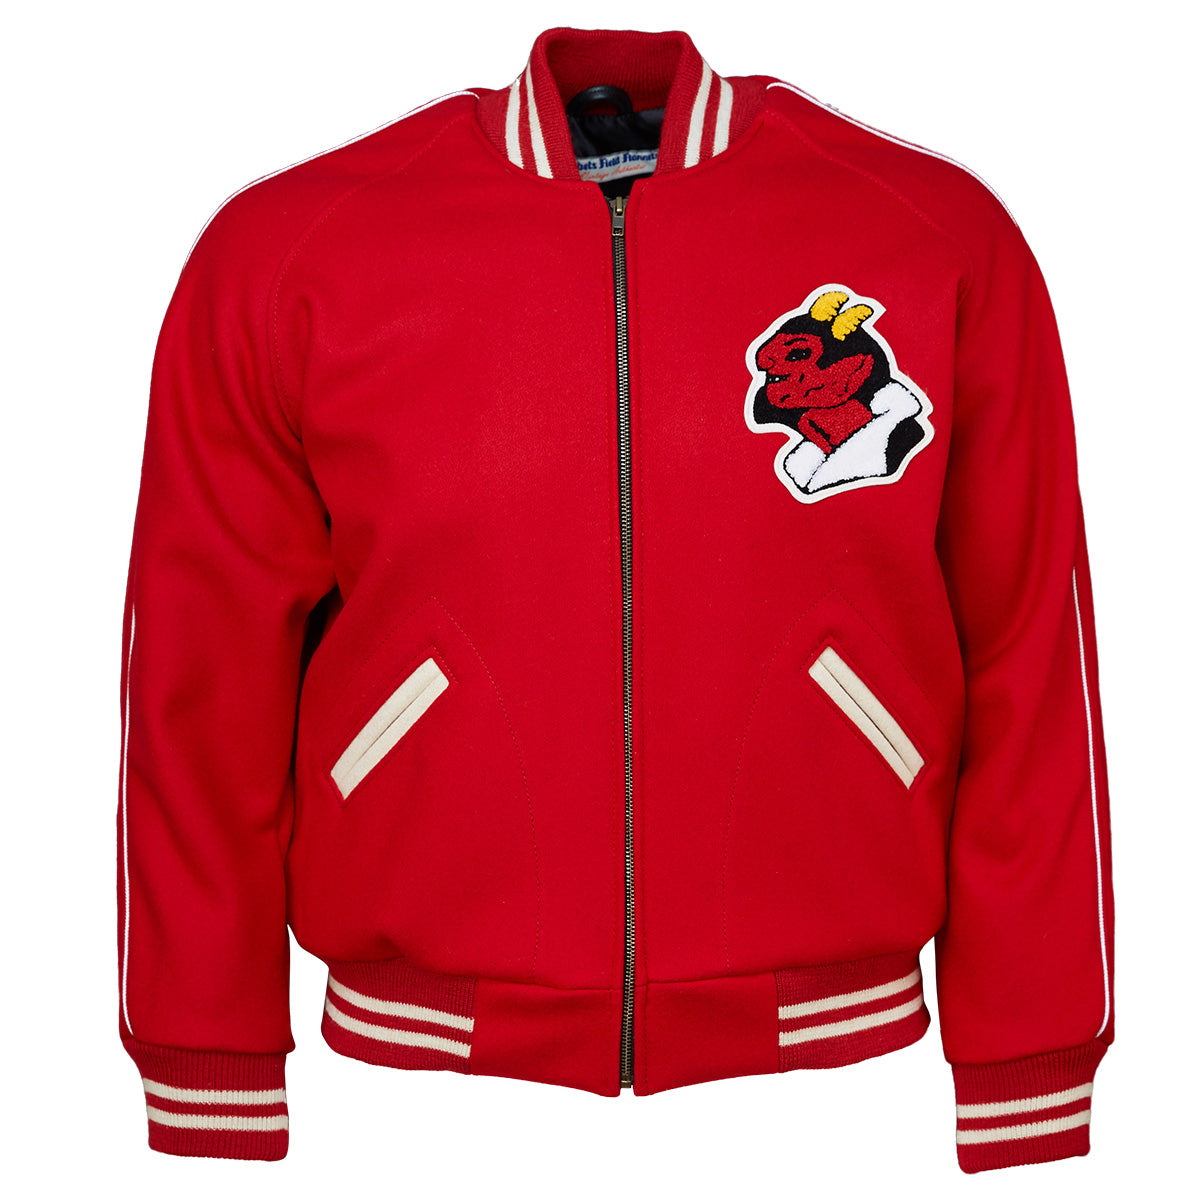 Mexico City Red Devils 1950 Authentic Jacket